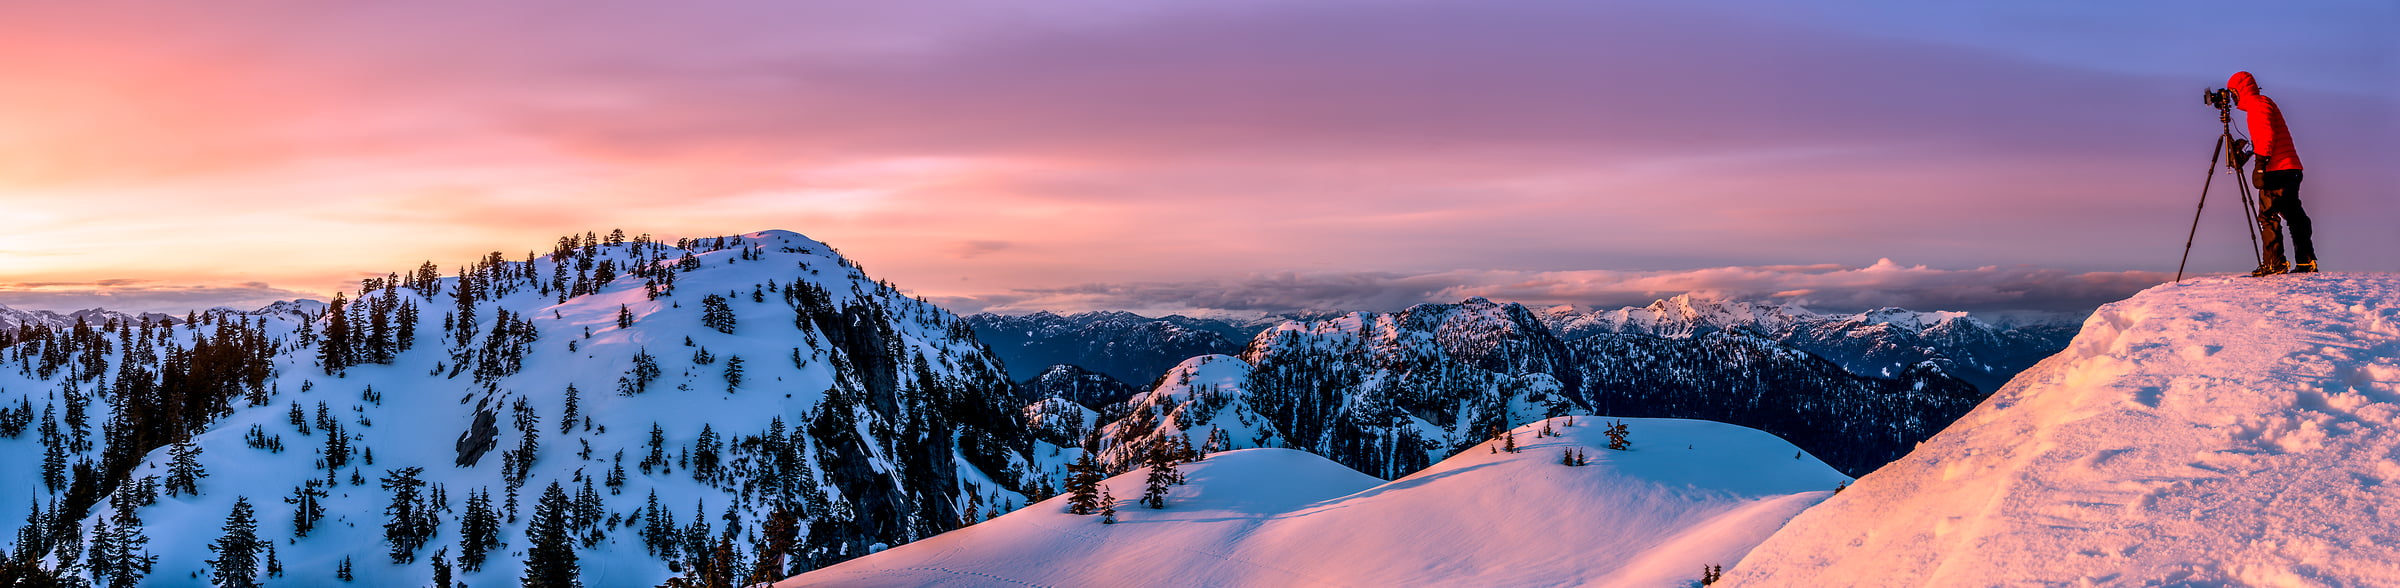 193 megapixels! A very high resolution, large-format VAST photo of a photographer photographing sunset from the summit of Mount Seymour in the North Shore Mountains; fine art landscape photograph created by Tim Shields in the District of North Vancouver, British Columbia, Canada.